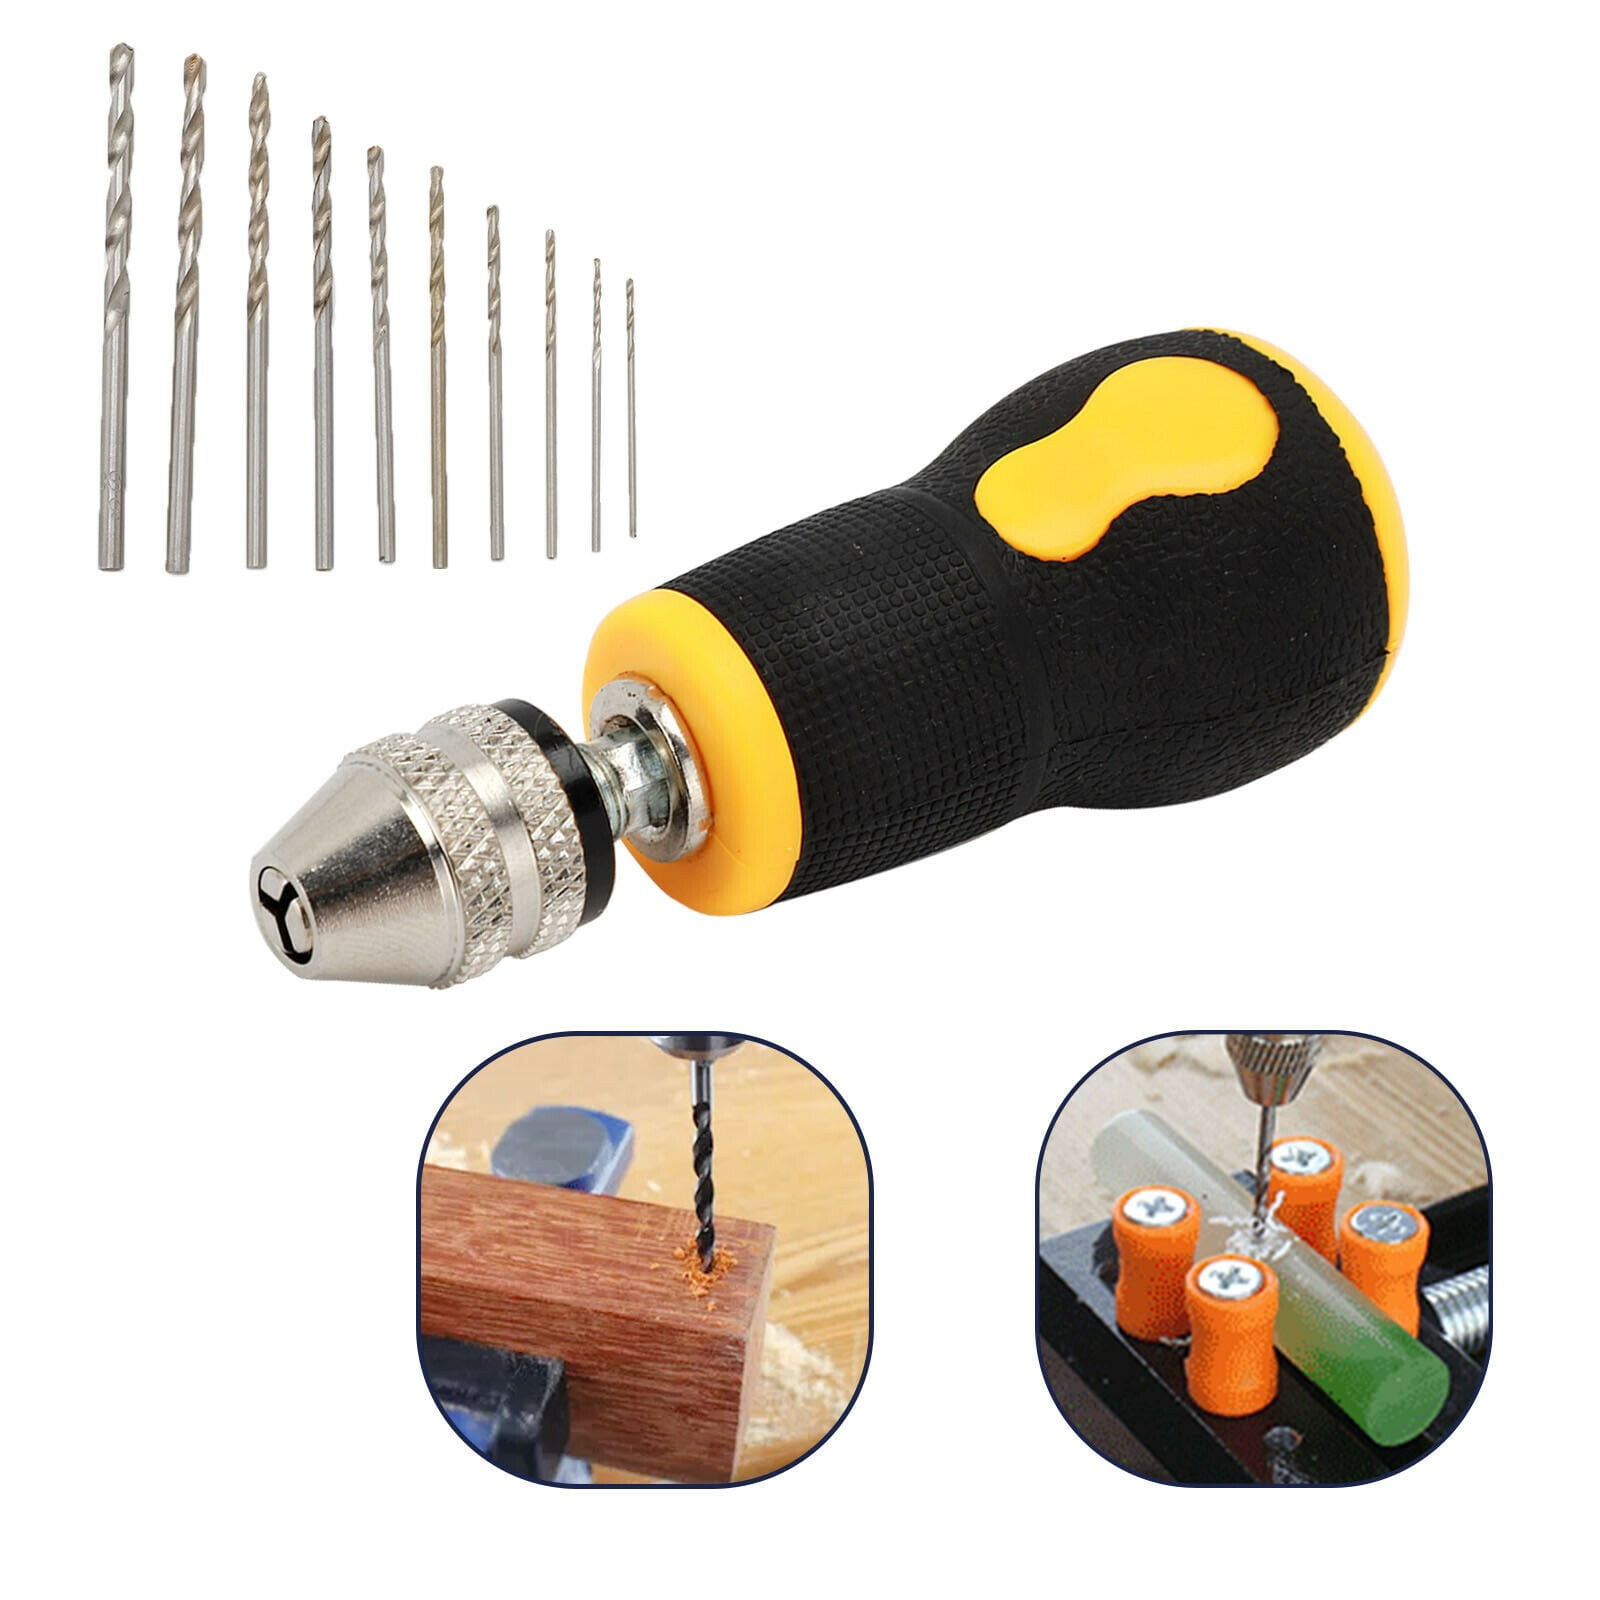 Miniature Electric Drill Set: USB-Powered with Bits – RainbowShop